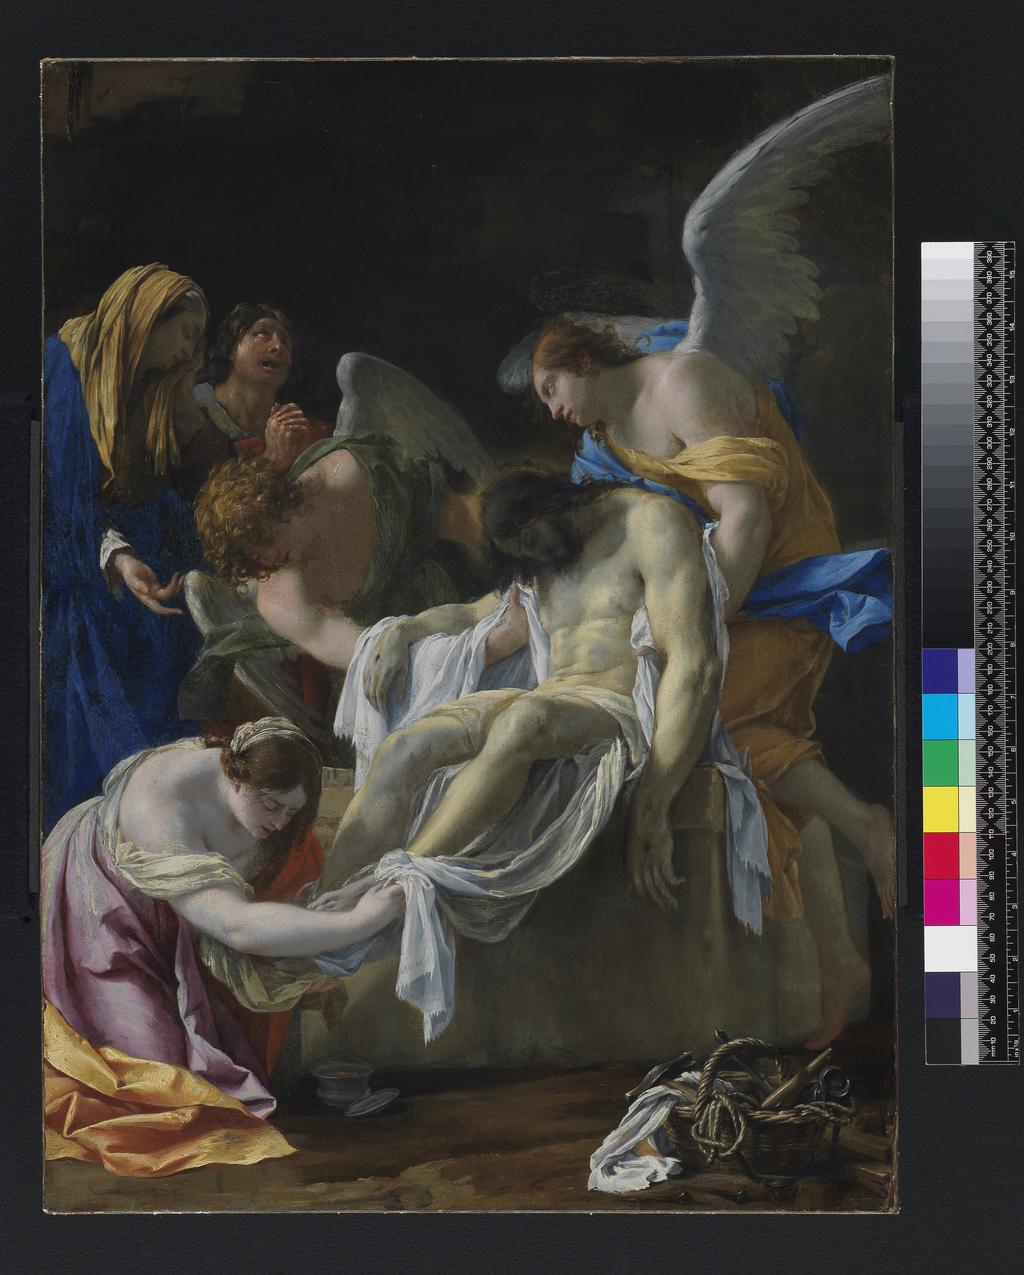 An image of The Entombment. Vouet, Simon (French, 1590-1649). Oil on panel, height, 56.5, cm, width, 41.5, cm, circa 1635-1638. Probable dates. Production Note: Possibly a modello for the painting commissioned by Pierre Seguier several versions of which are known, but of which the principal one generally is considered that in Epinal, Musée des Beaux-Arts (no. 32).